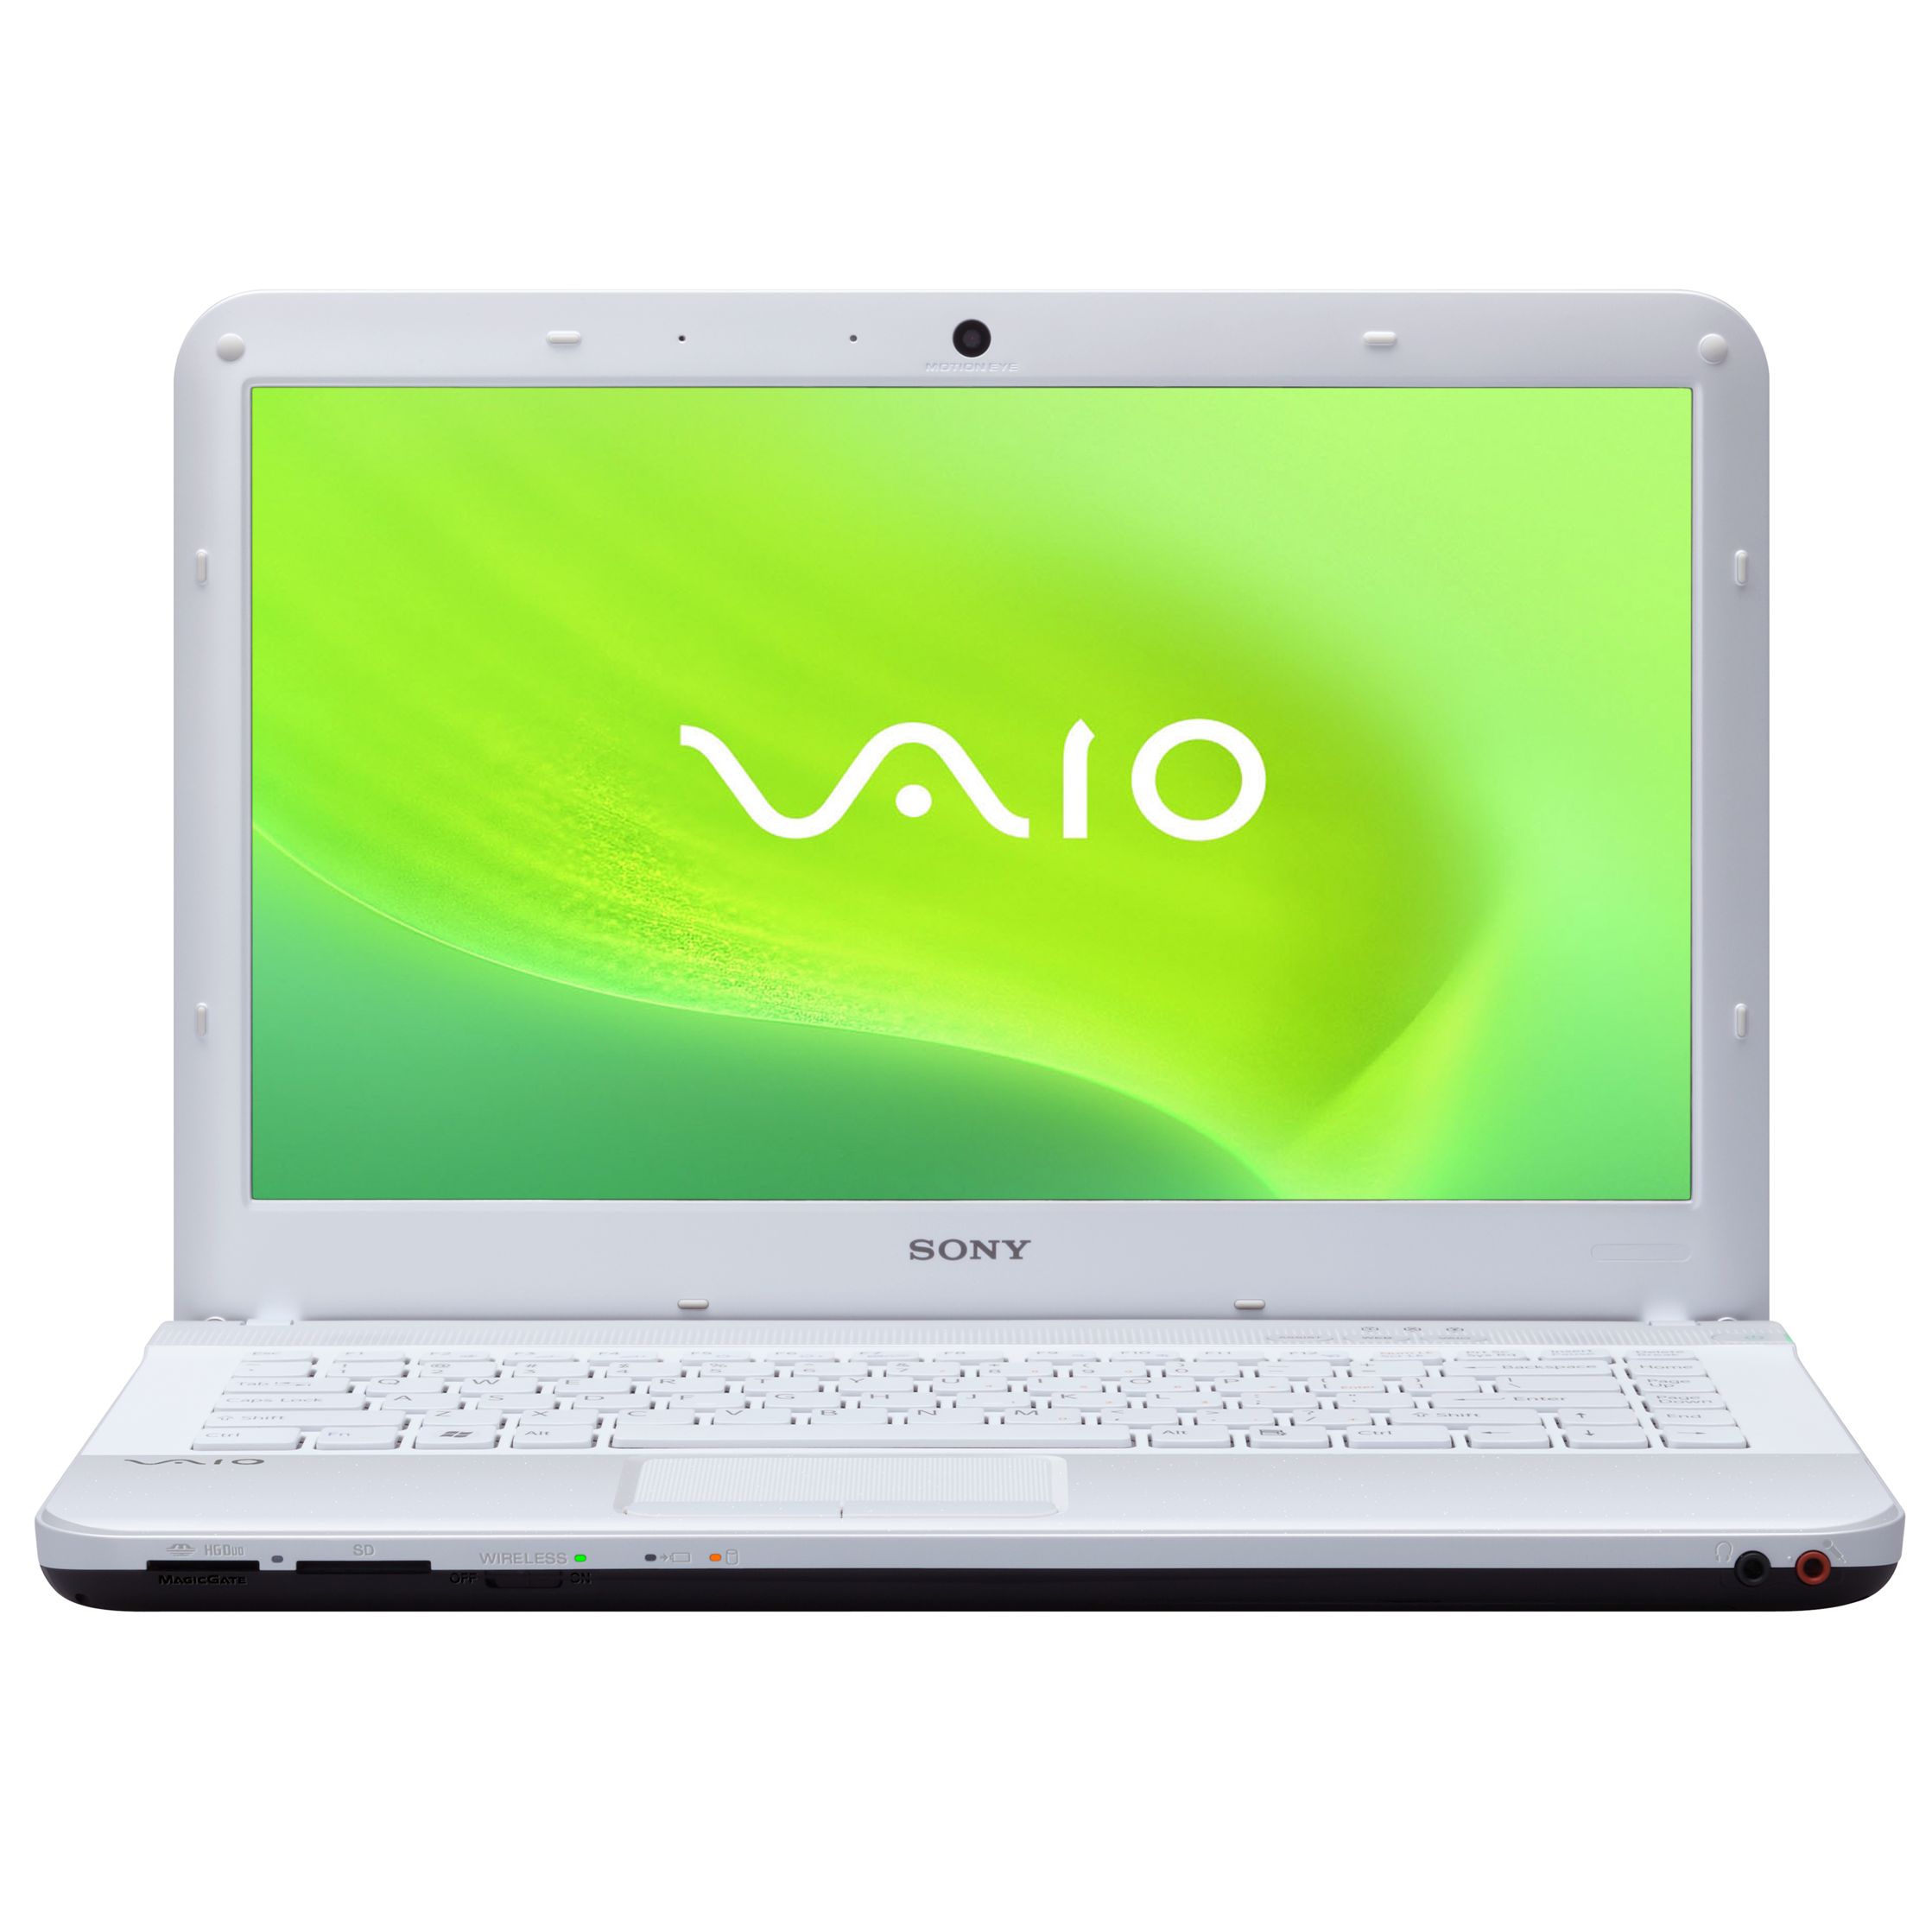 Sony Vaio VPC-EA3S1E/W Laptop, Intel Core i3, 500GB, 2.4GHz with 14 Inch Display, White at John Lewis